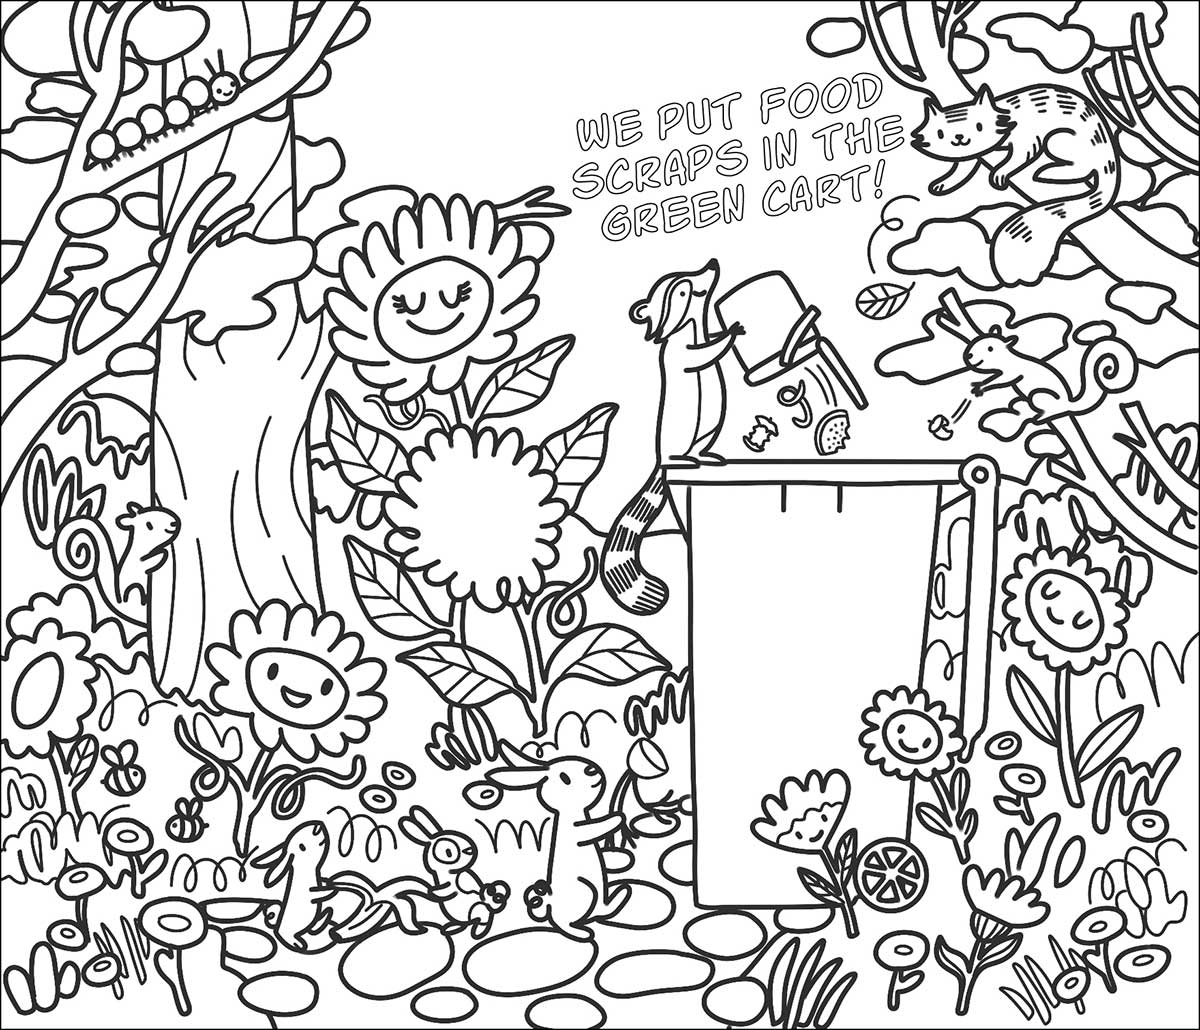 A coloring page features outlined woodland creatures, trees and flowers smiling with a raccoon putting food scraps into the green compost bin.